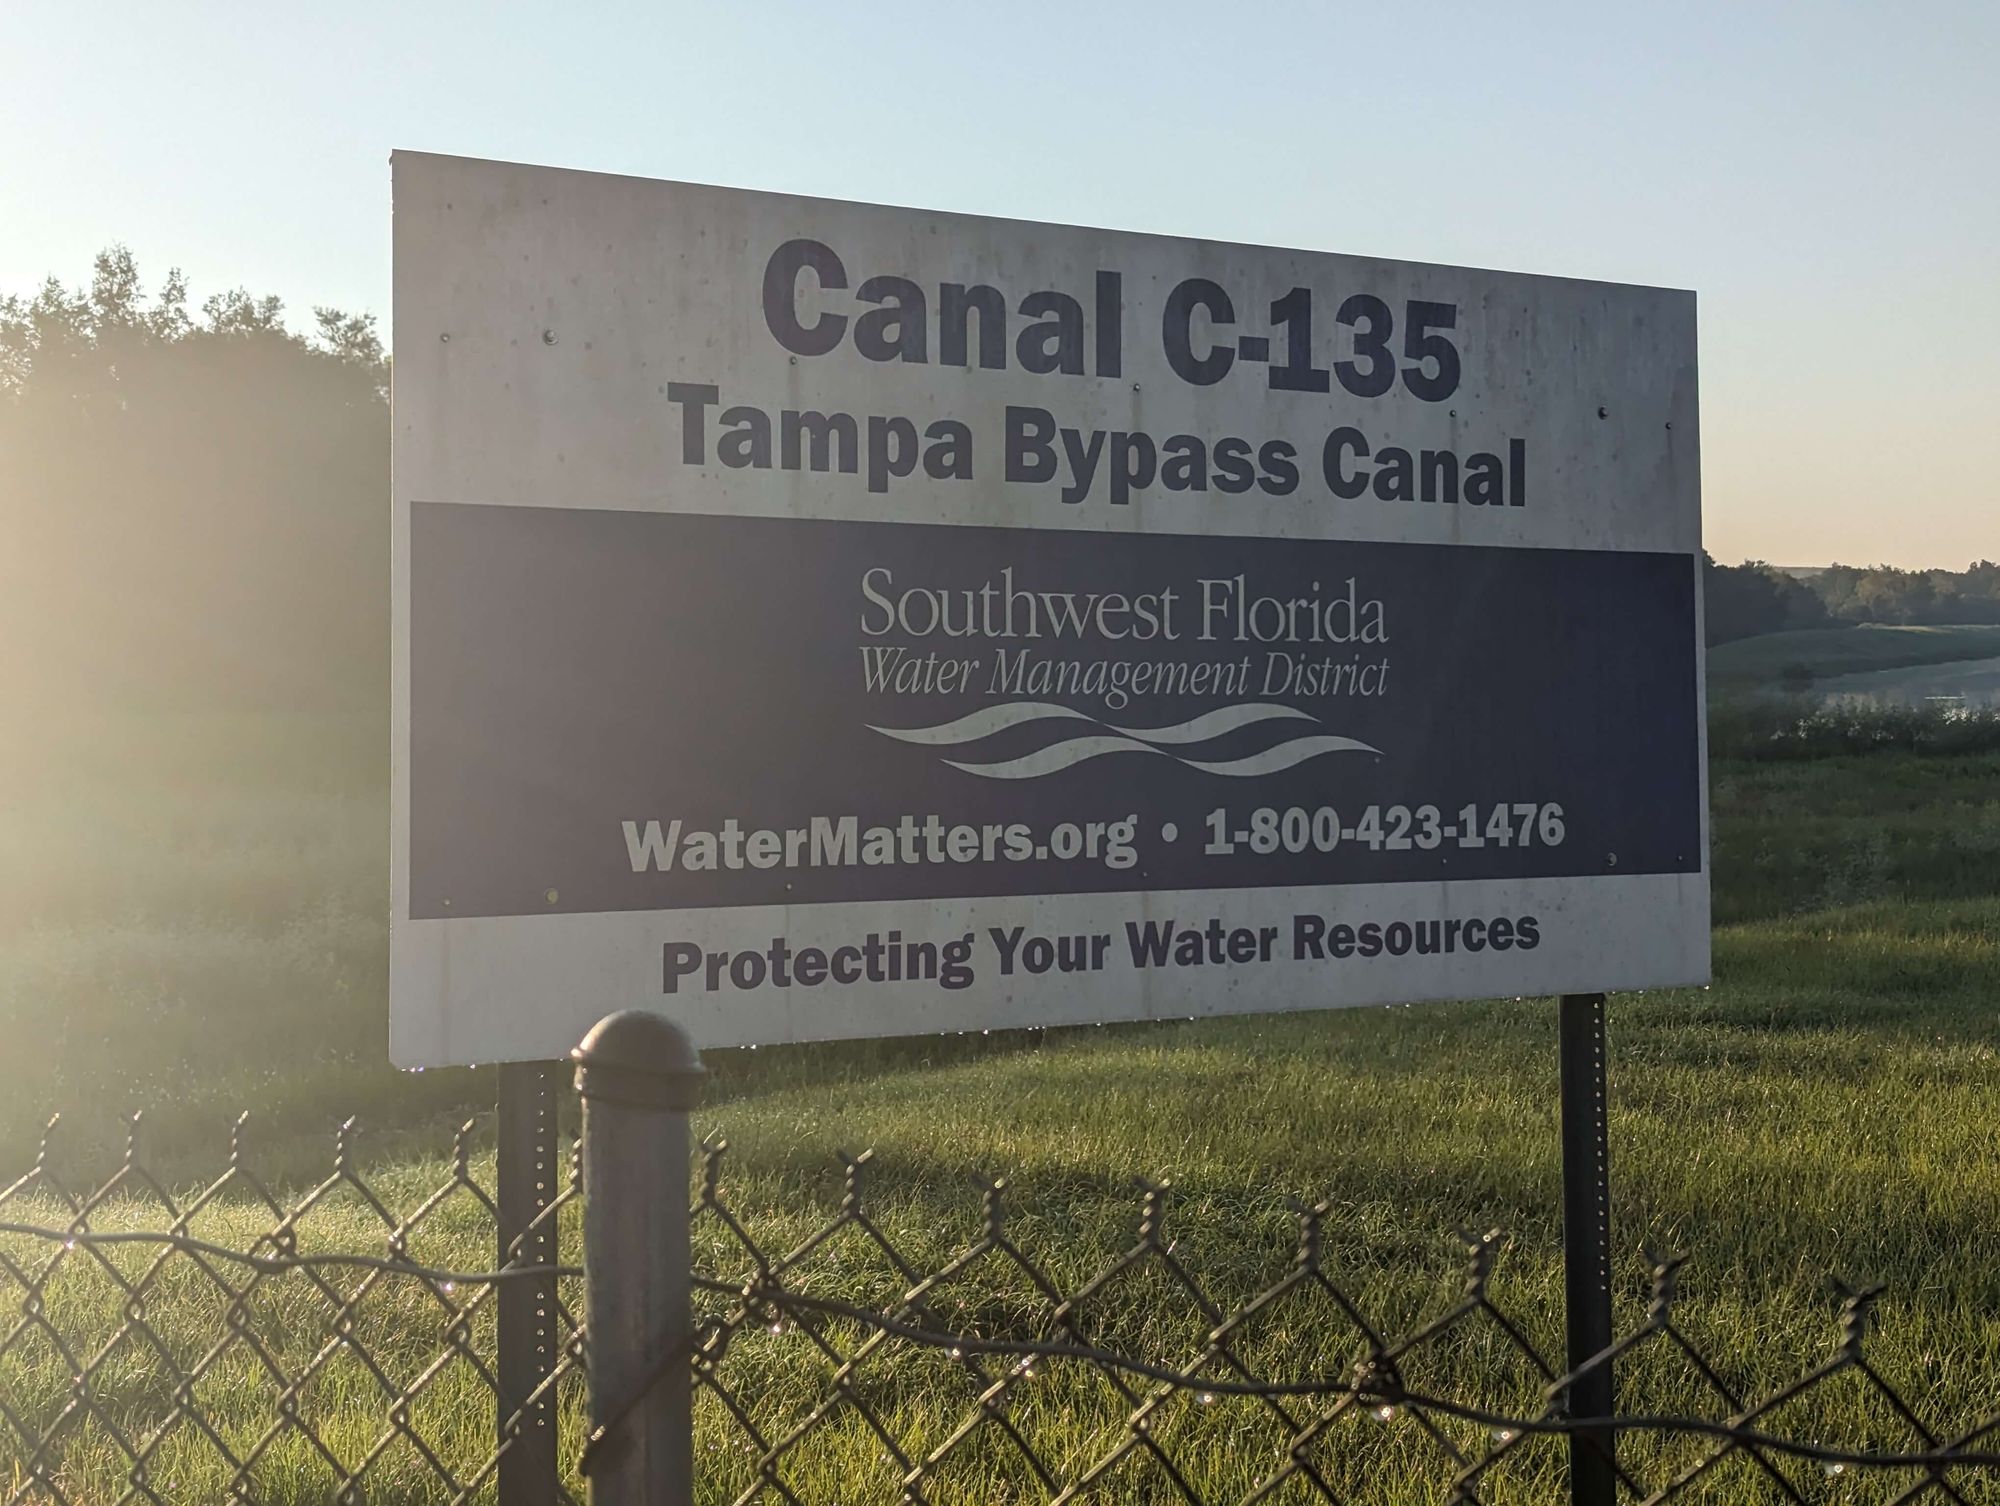 C-135 Tampa Bypass Canal